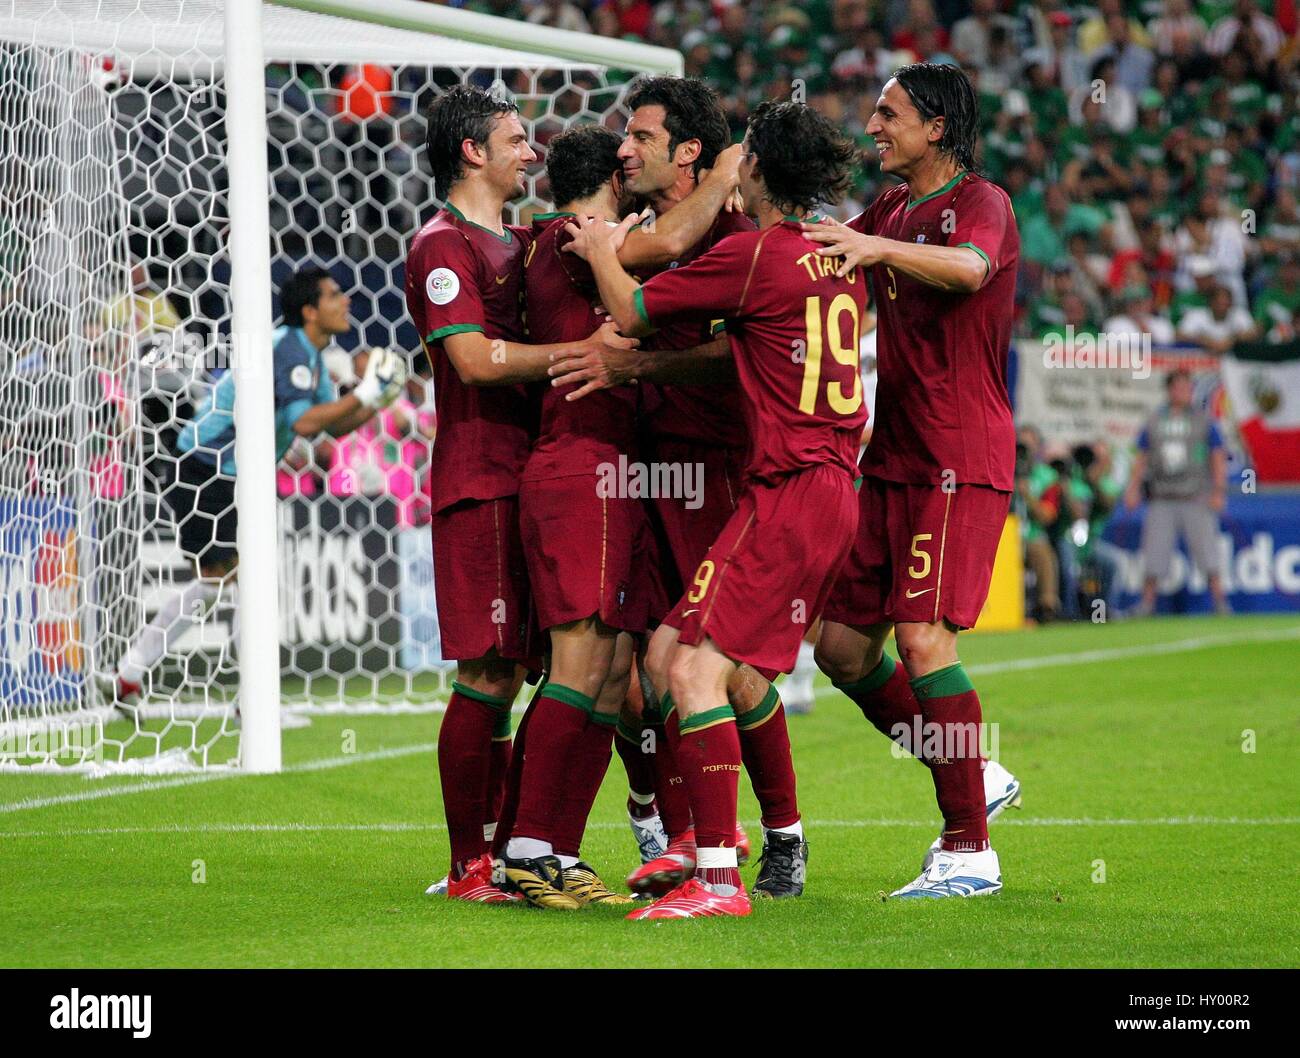 SABROSA SIMAO AND TEAM MATES PORTUGAL V MEXICO GELSENKIRCHEN GERMANY 21 June 2006 Stock Photo